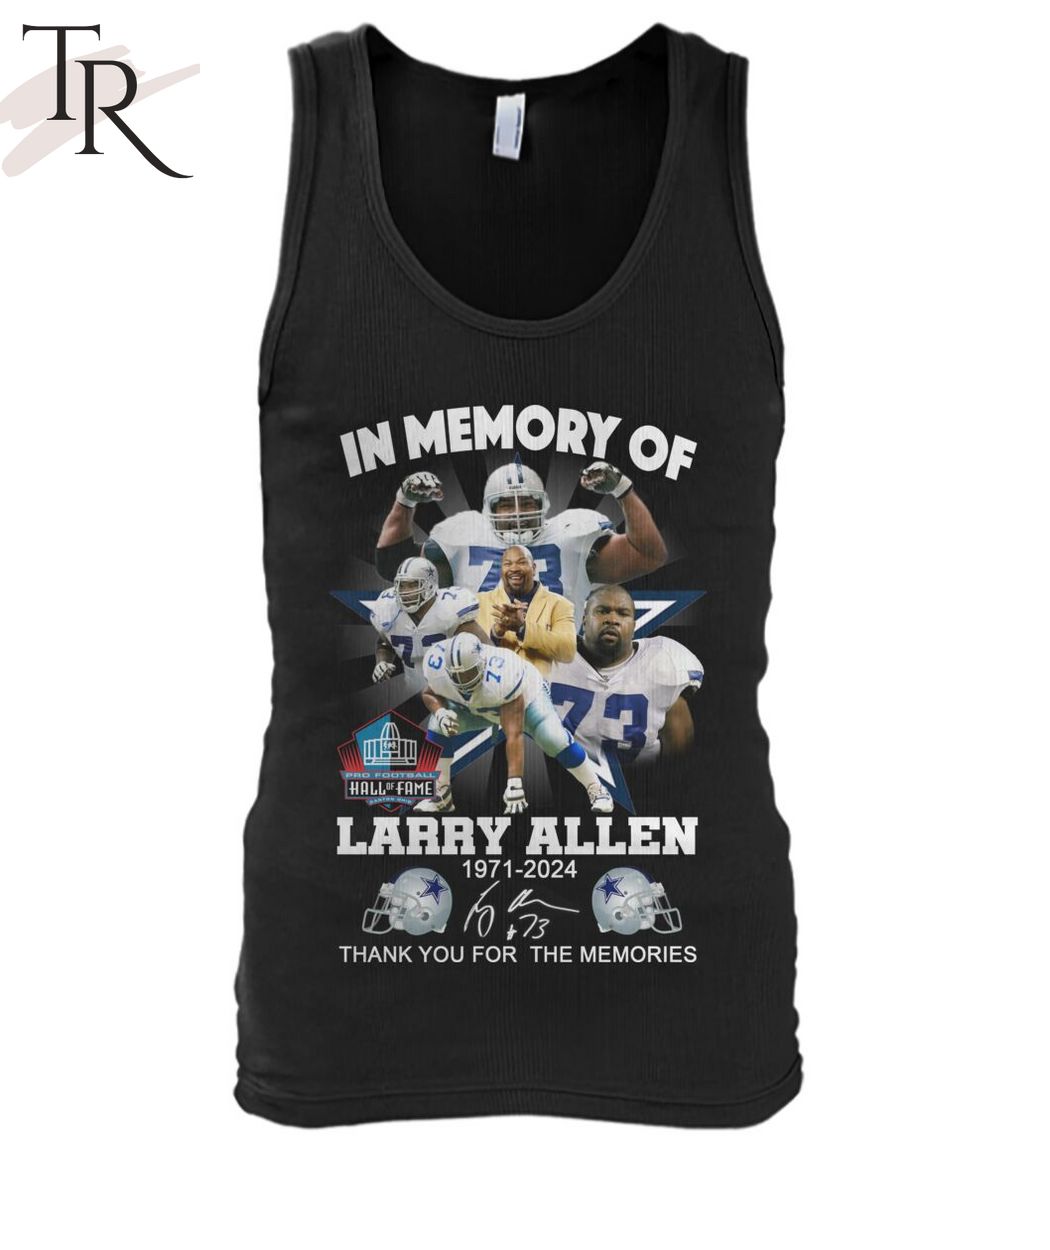 In Memory Of Larry Allen 1971-2024 Thank You For The Memories Hall Of Fame T-Shirt